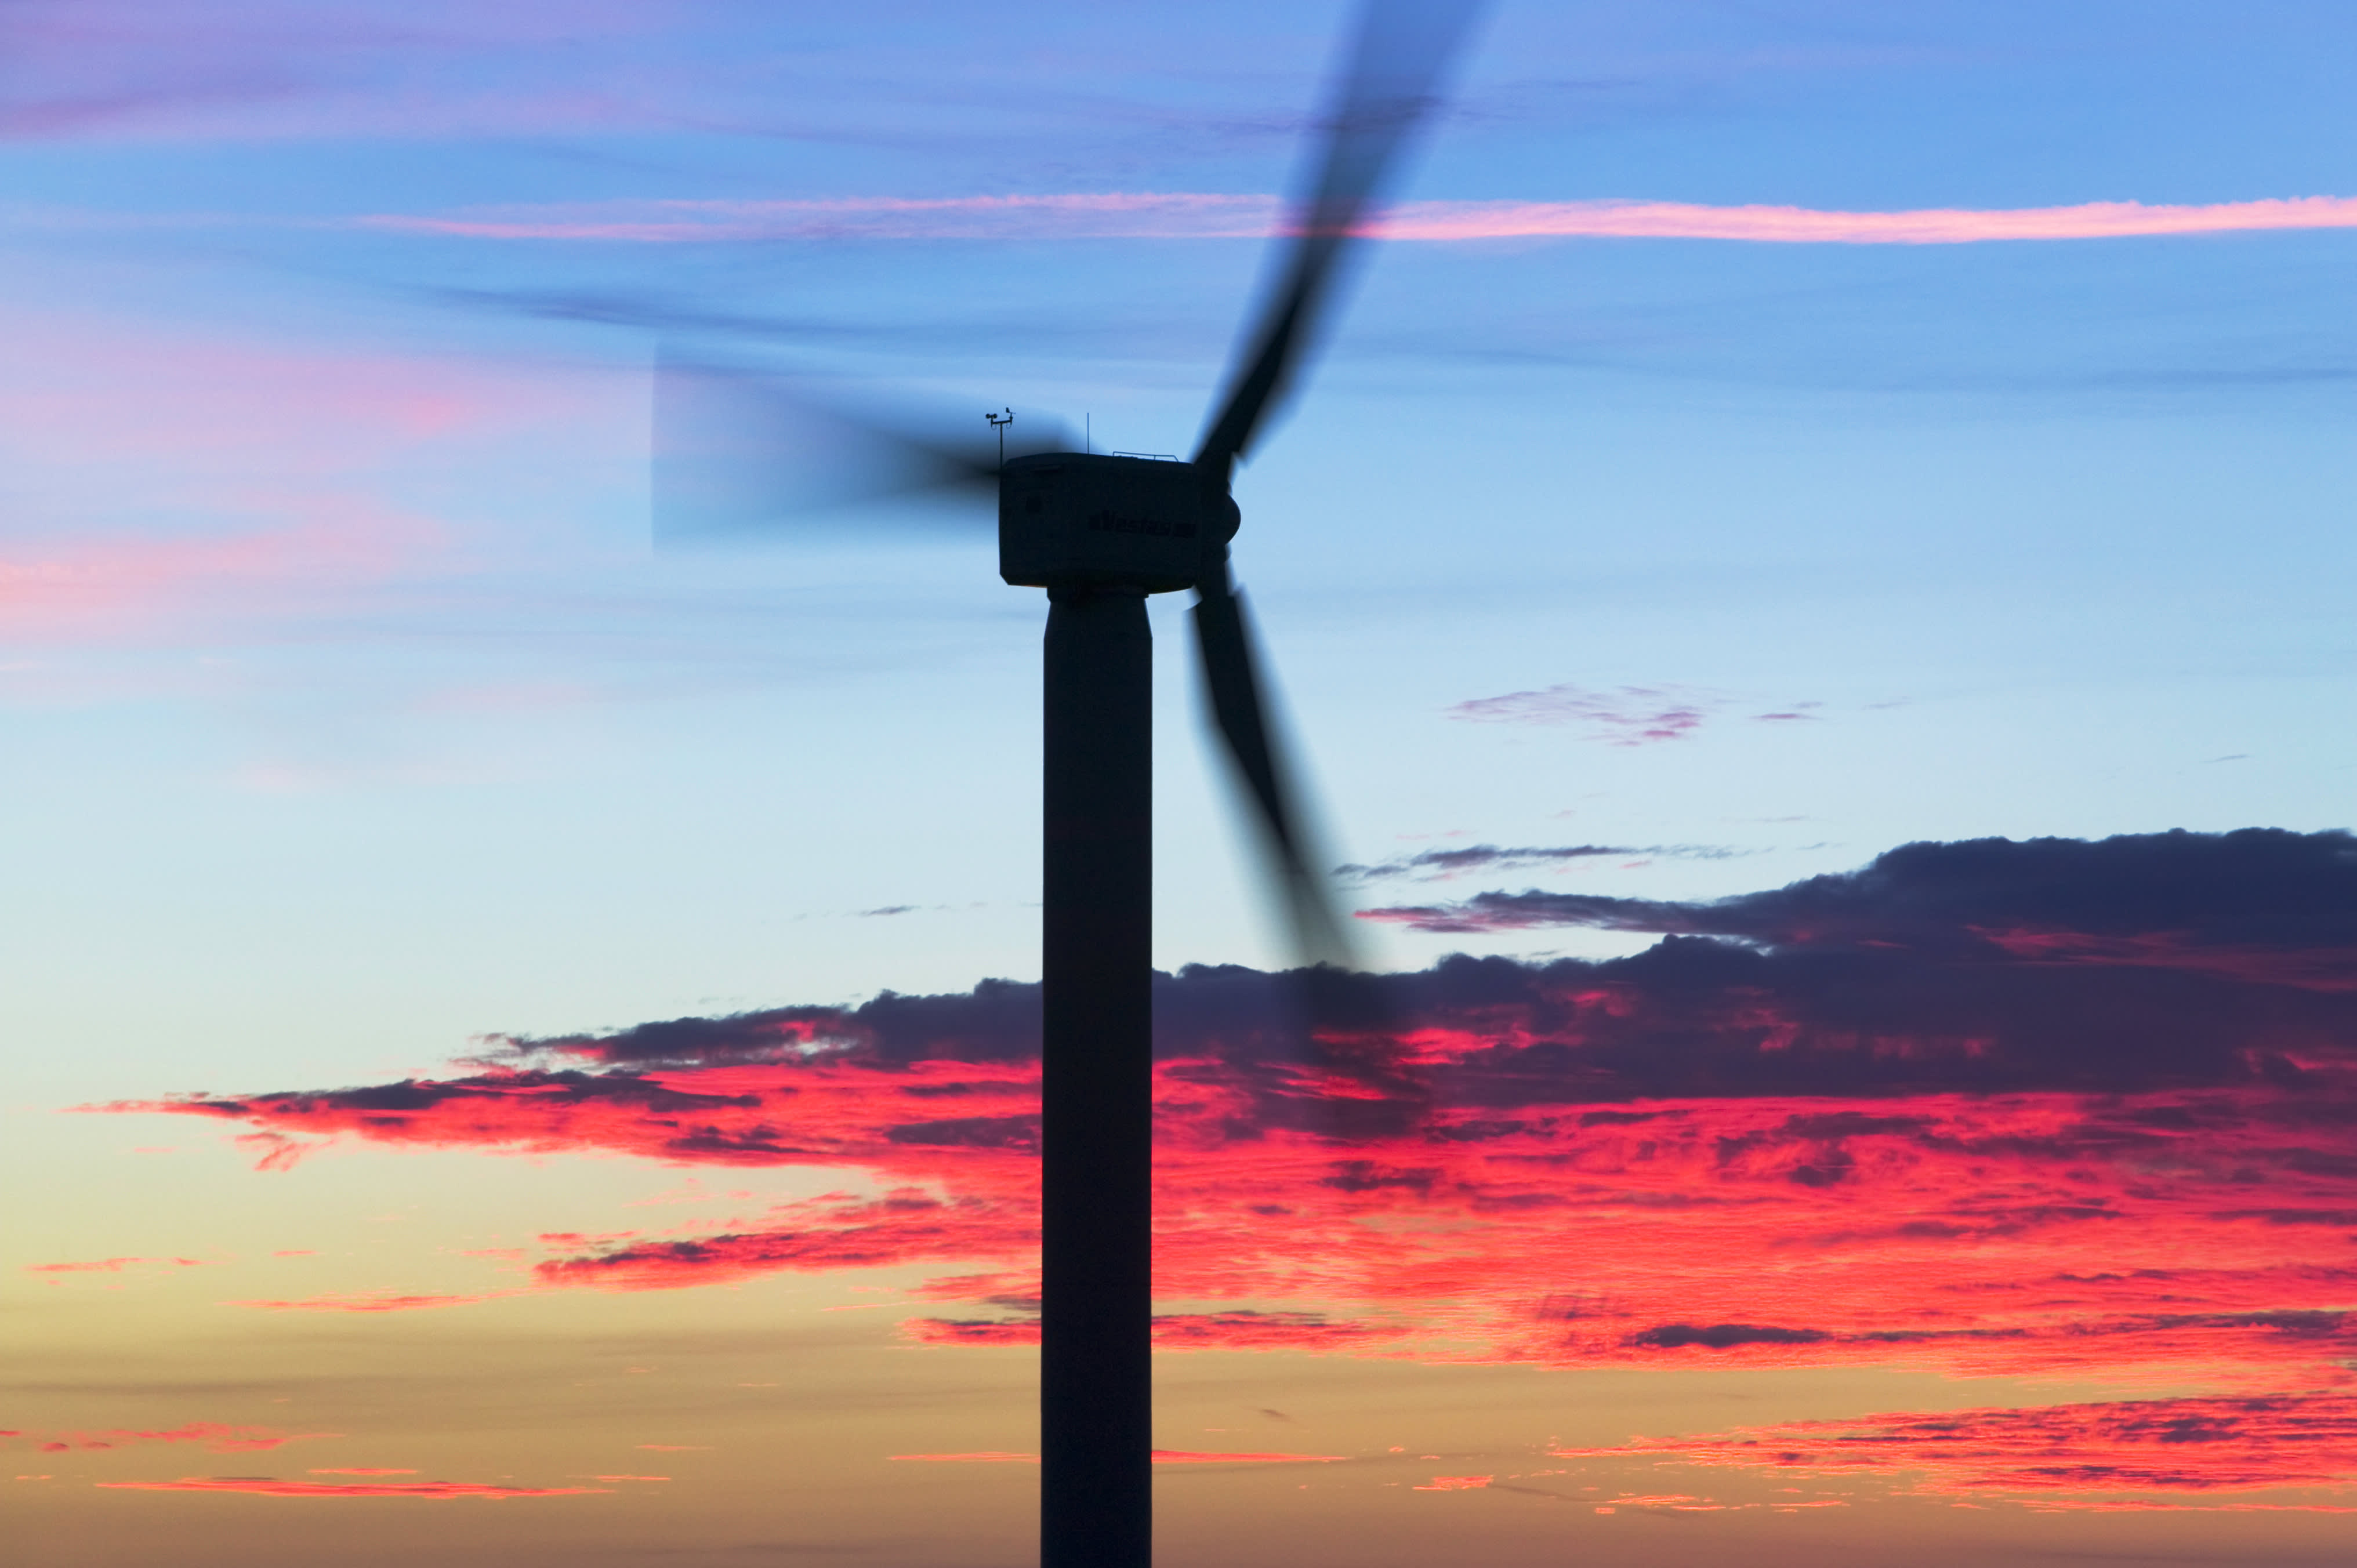 UK energy titan SSE says low wind, driest conditions in 70 years hit renewable generation